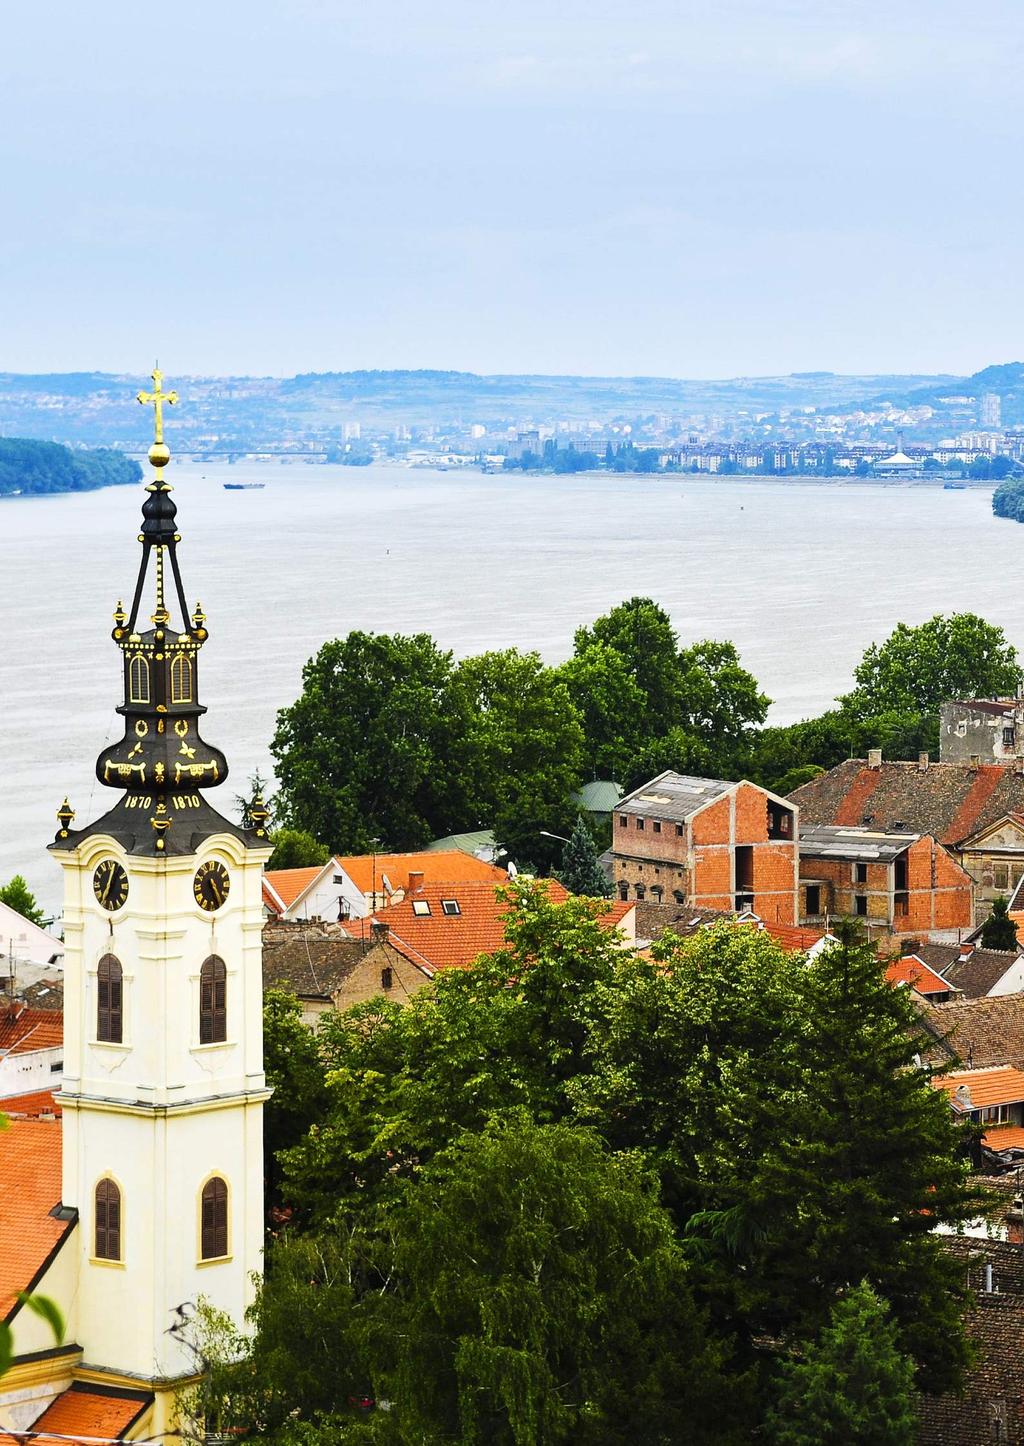 TOURIST ATTRACTIONS Serbia has a lot of history packed within its relatively small borders, including some of Europe s oldest settlements and the birthplaces of no fewer than 17 Roman emperors, all